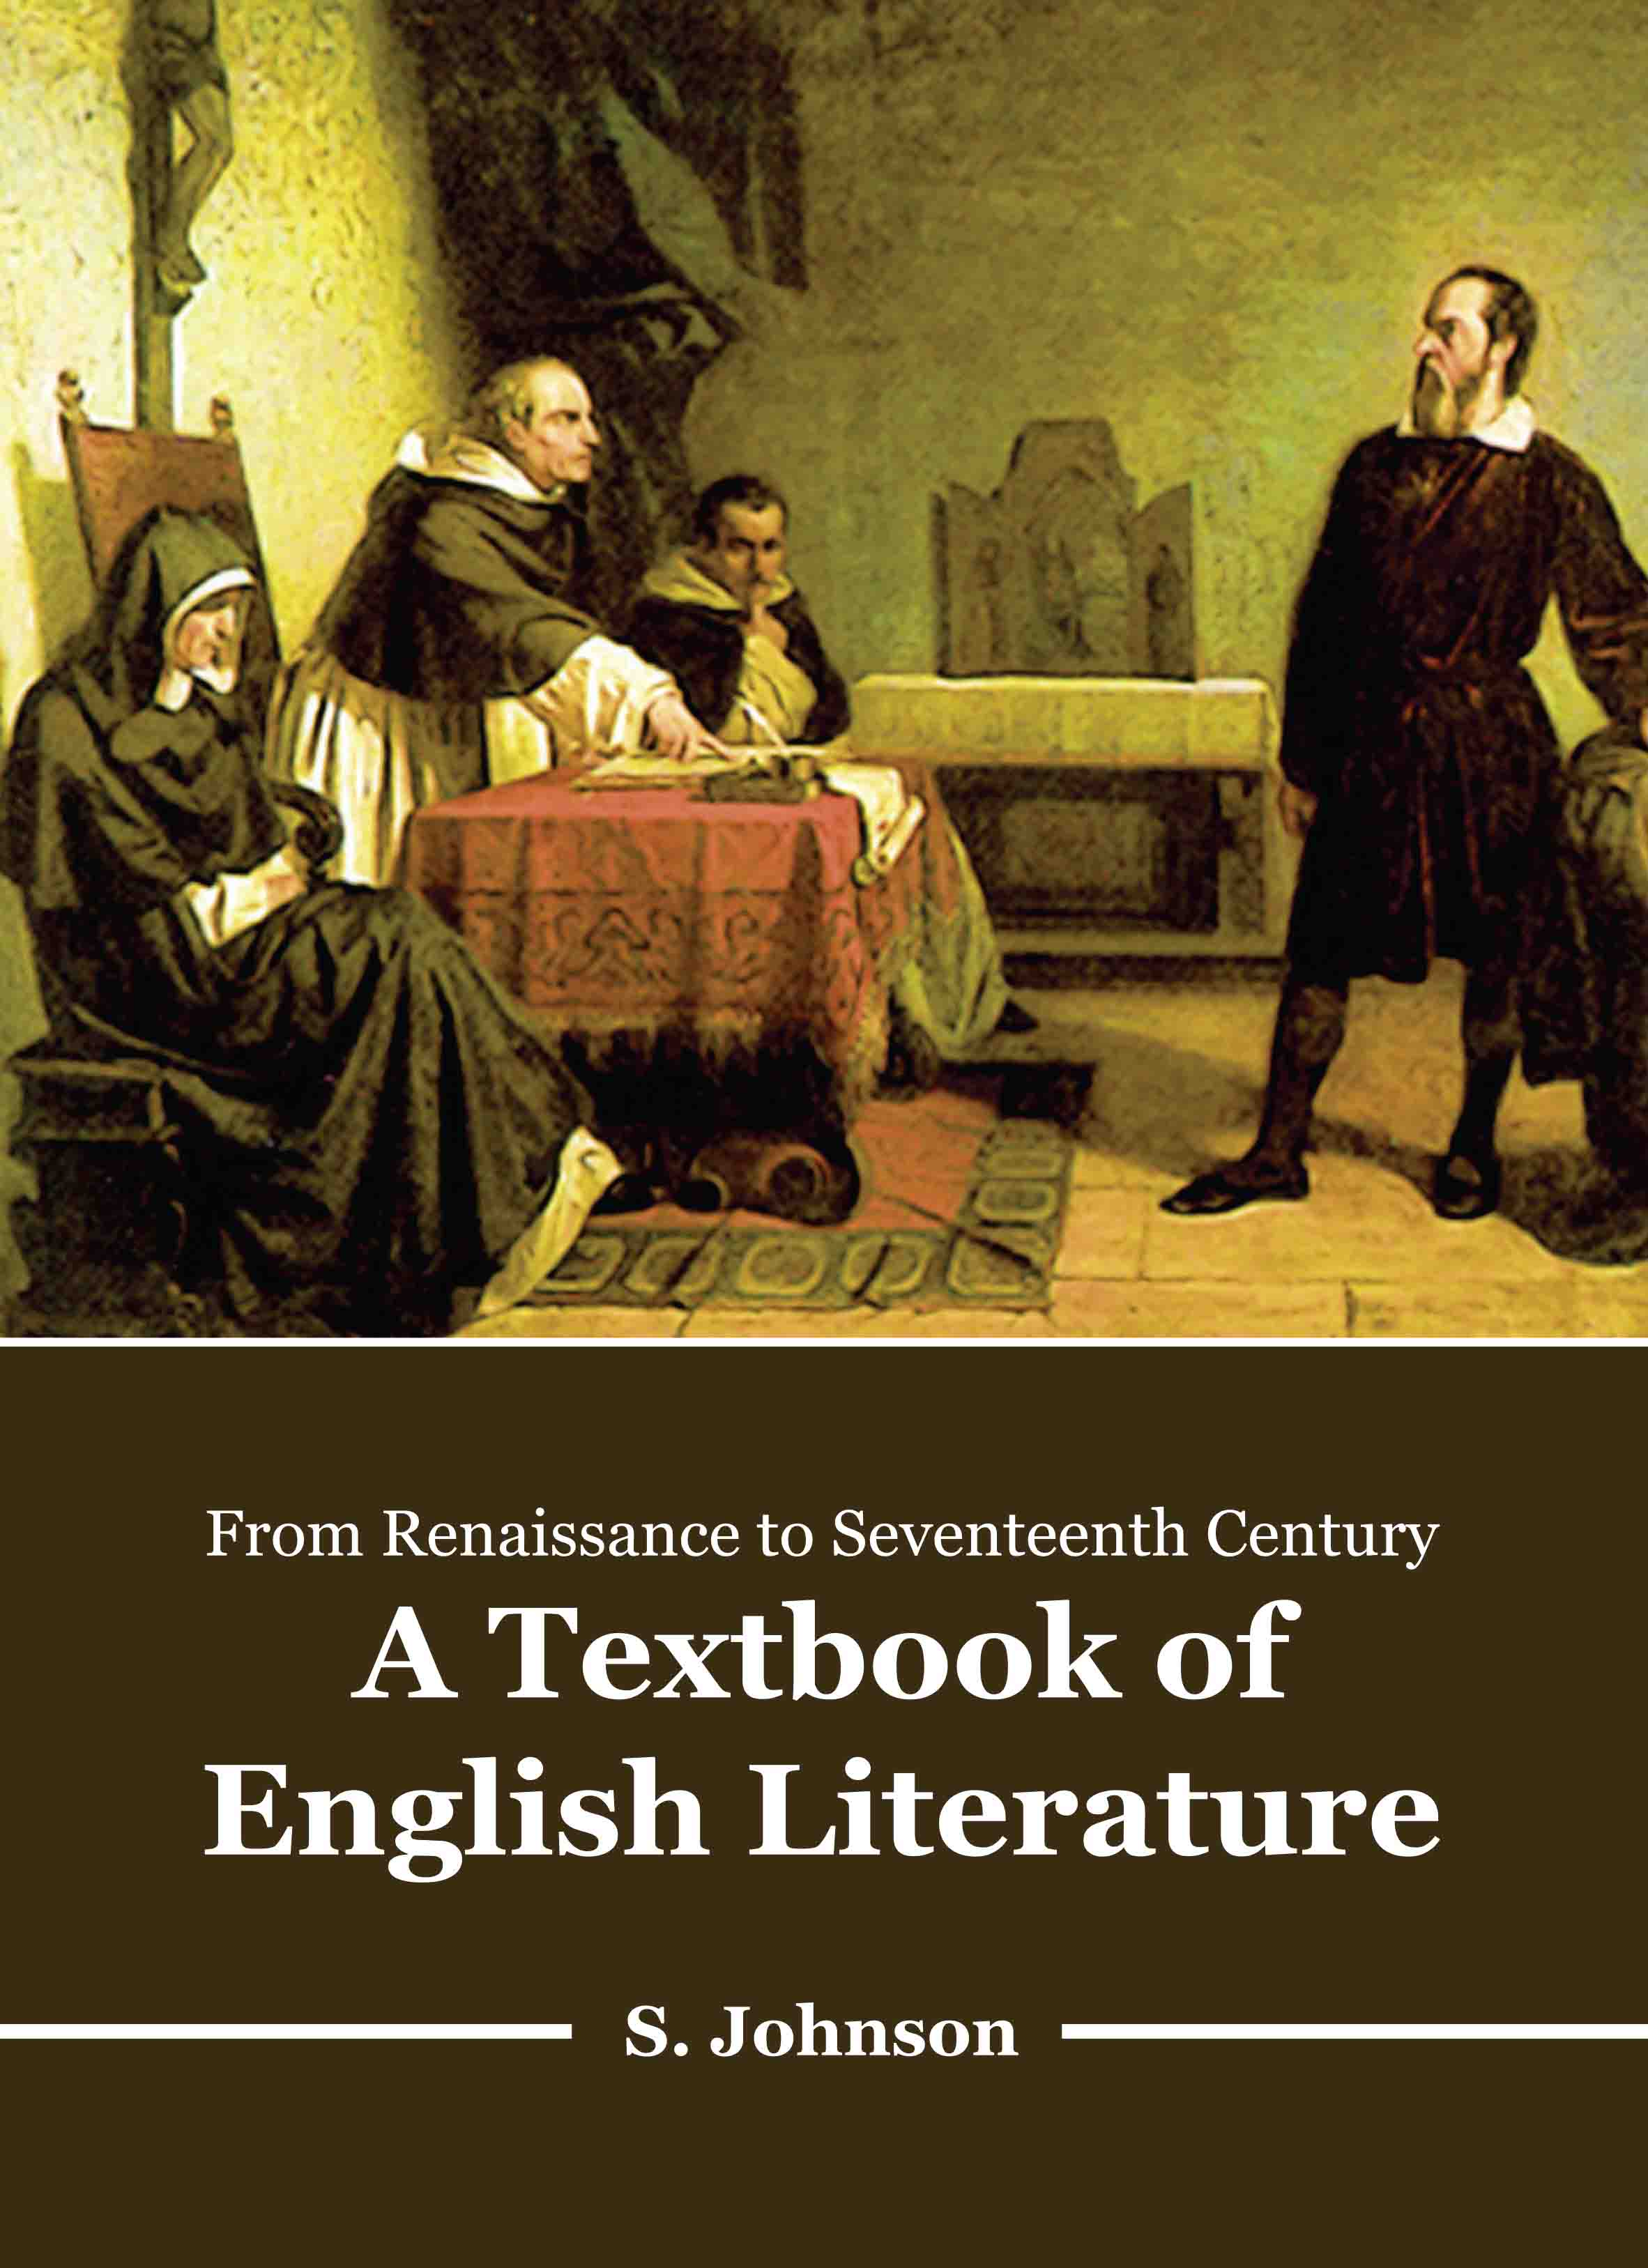 From Renaissance to Seventeenth Century: A Textbook of English Literature